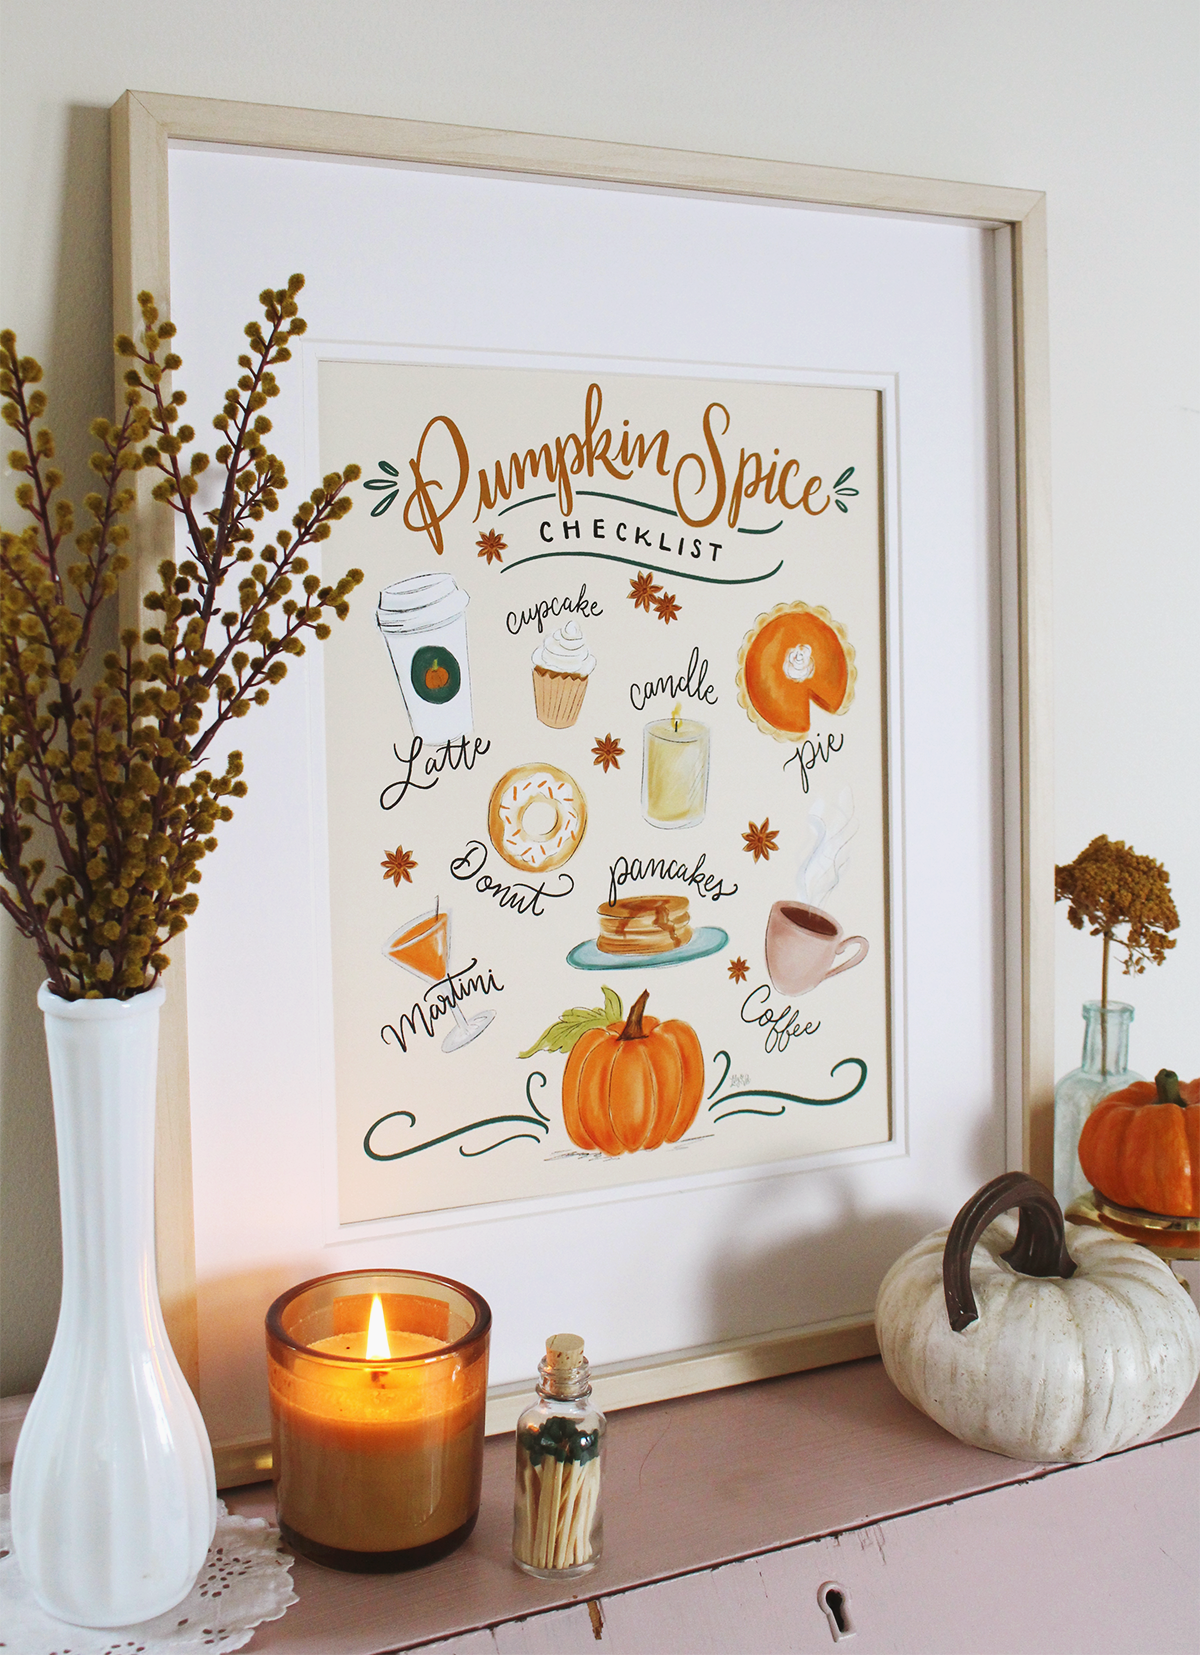 Pumpkin Spice Checklist Art Print to Decorate Your Home for Fall